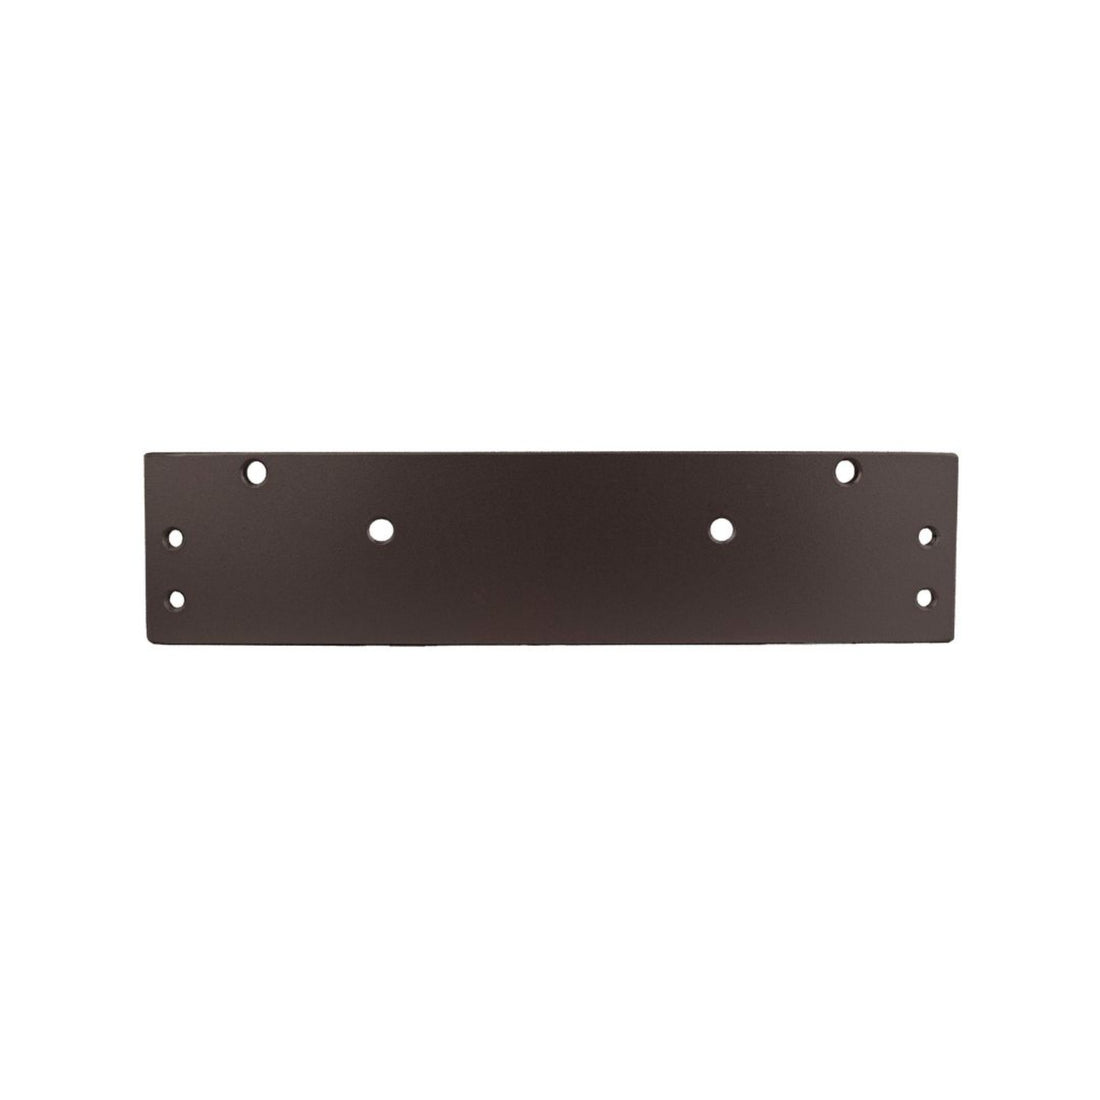 Parallel Arm Compatible Drop Plate for 4300 Series Closers Pull Side Door Mount and Top Jamb -  Pro-Edge HD